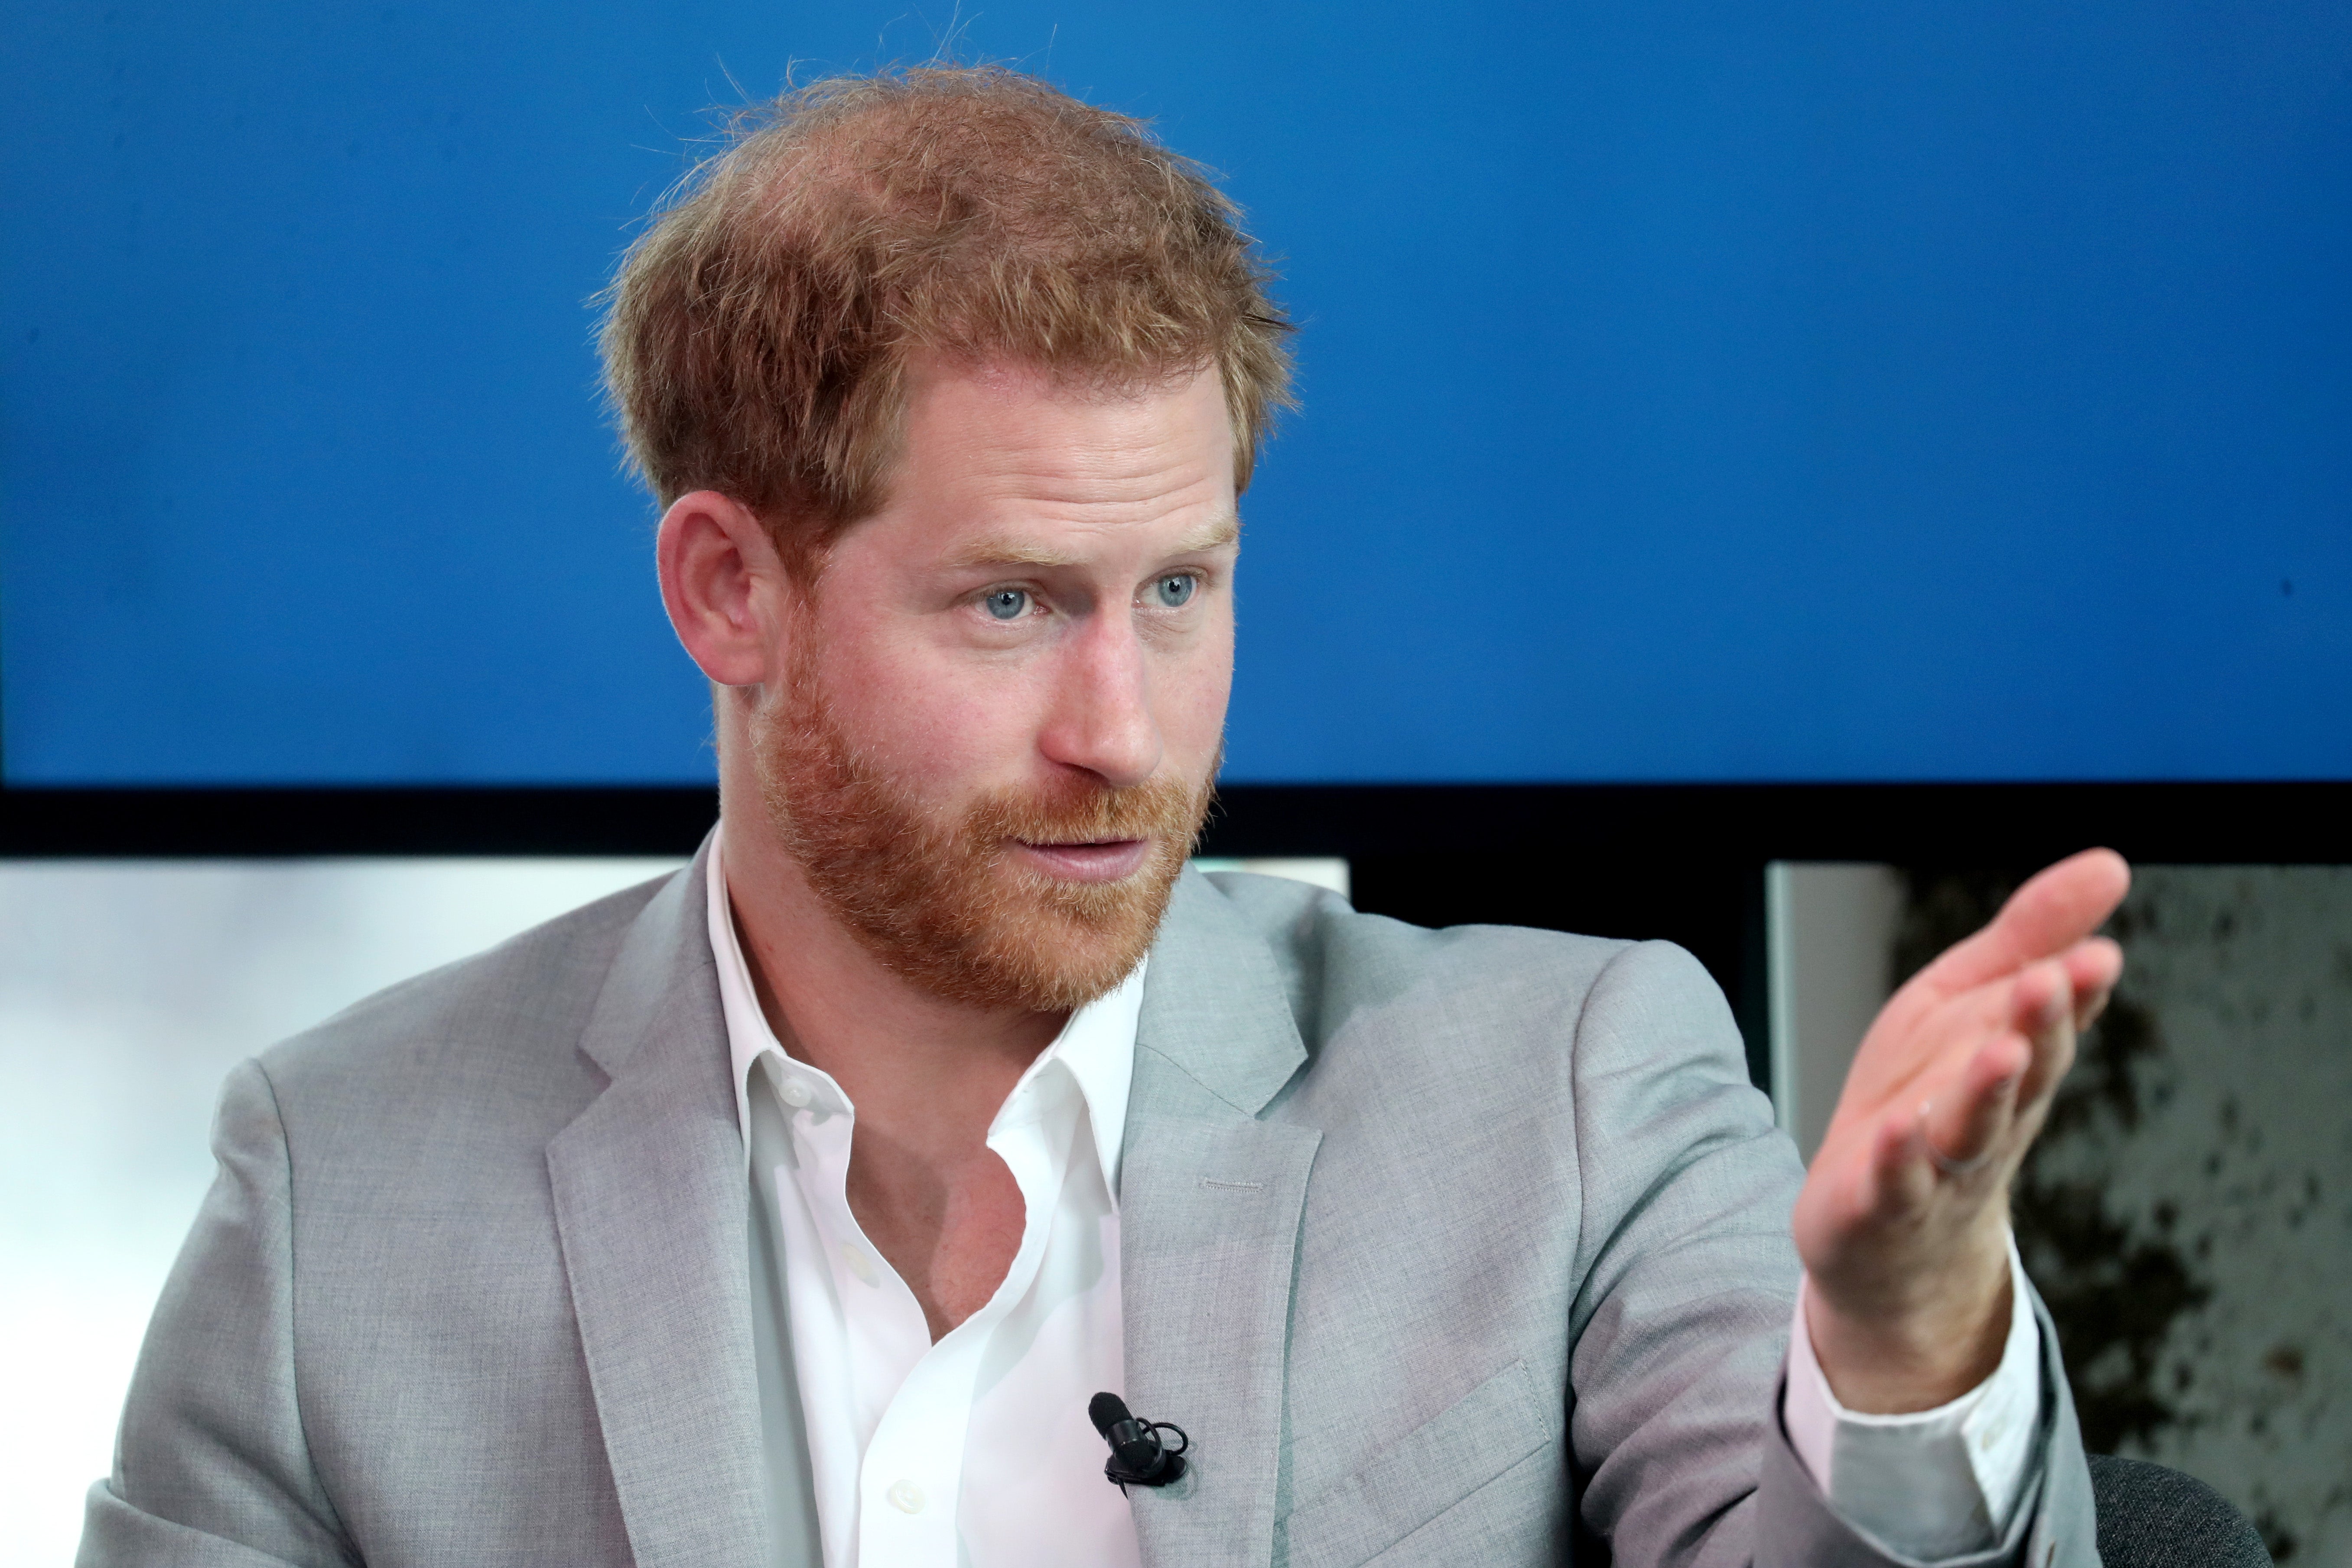 Prince Harry joins new commission on misinformation